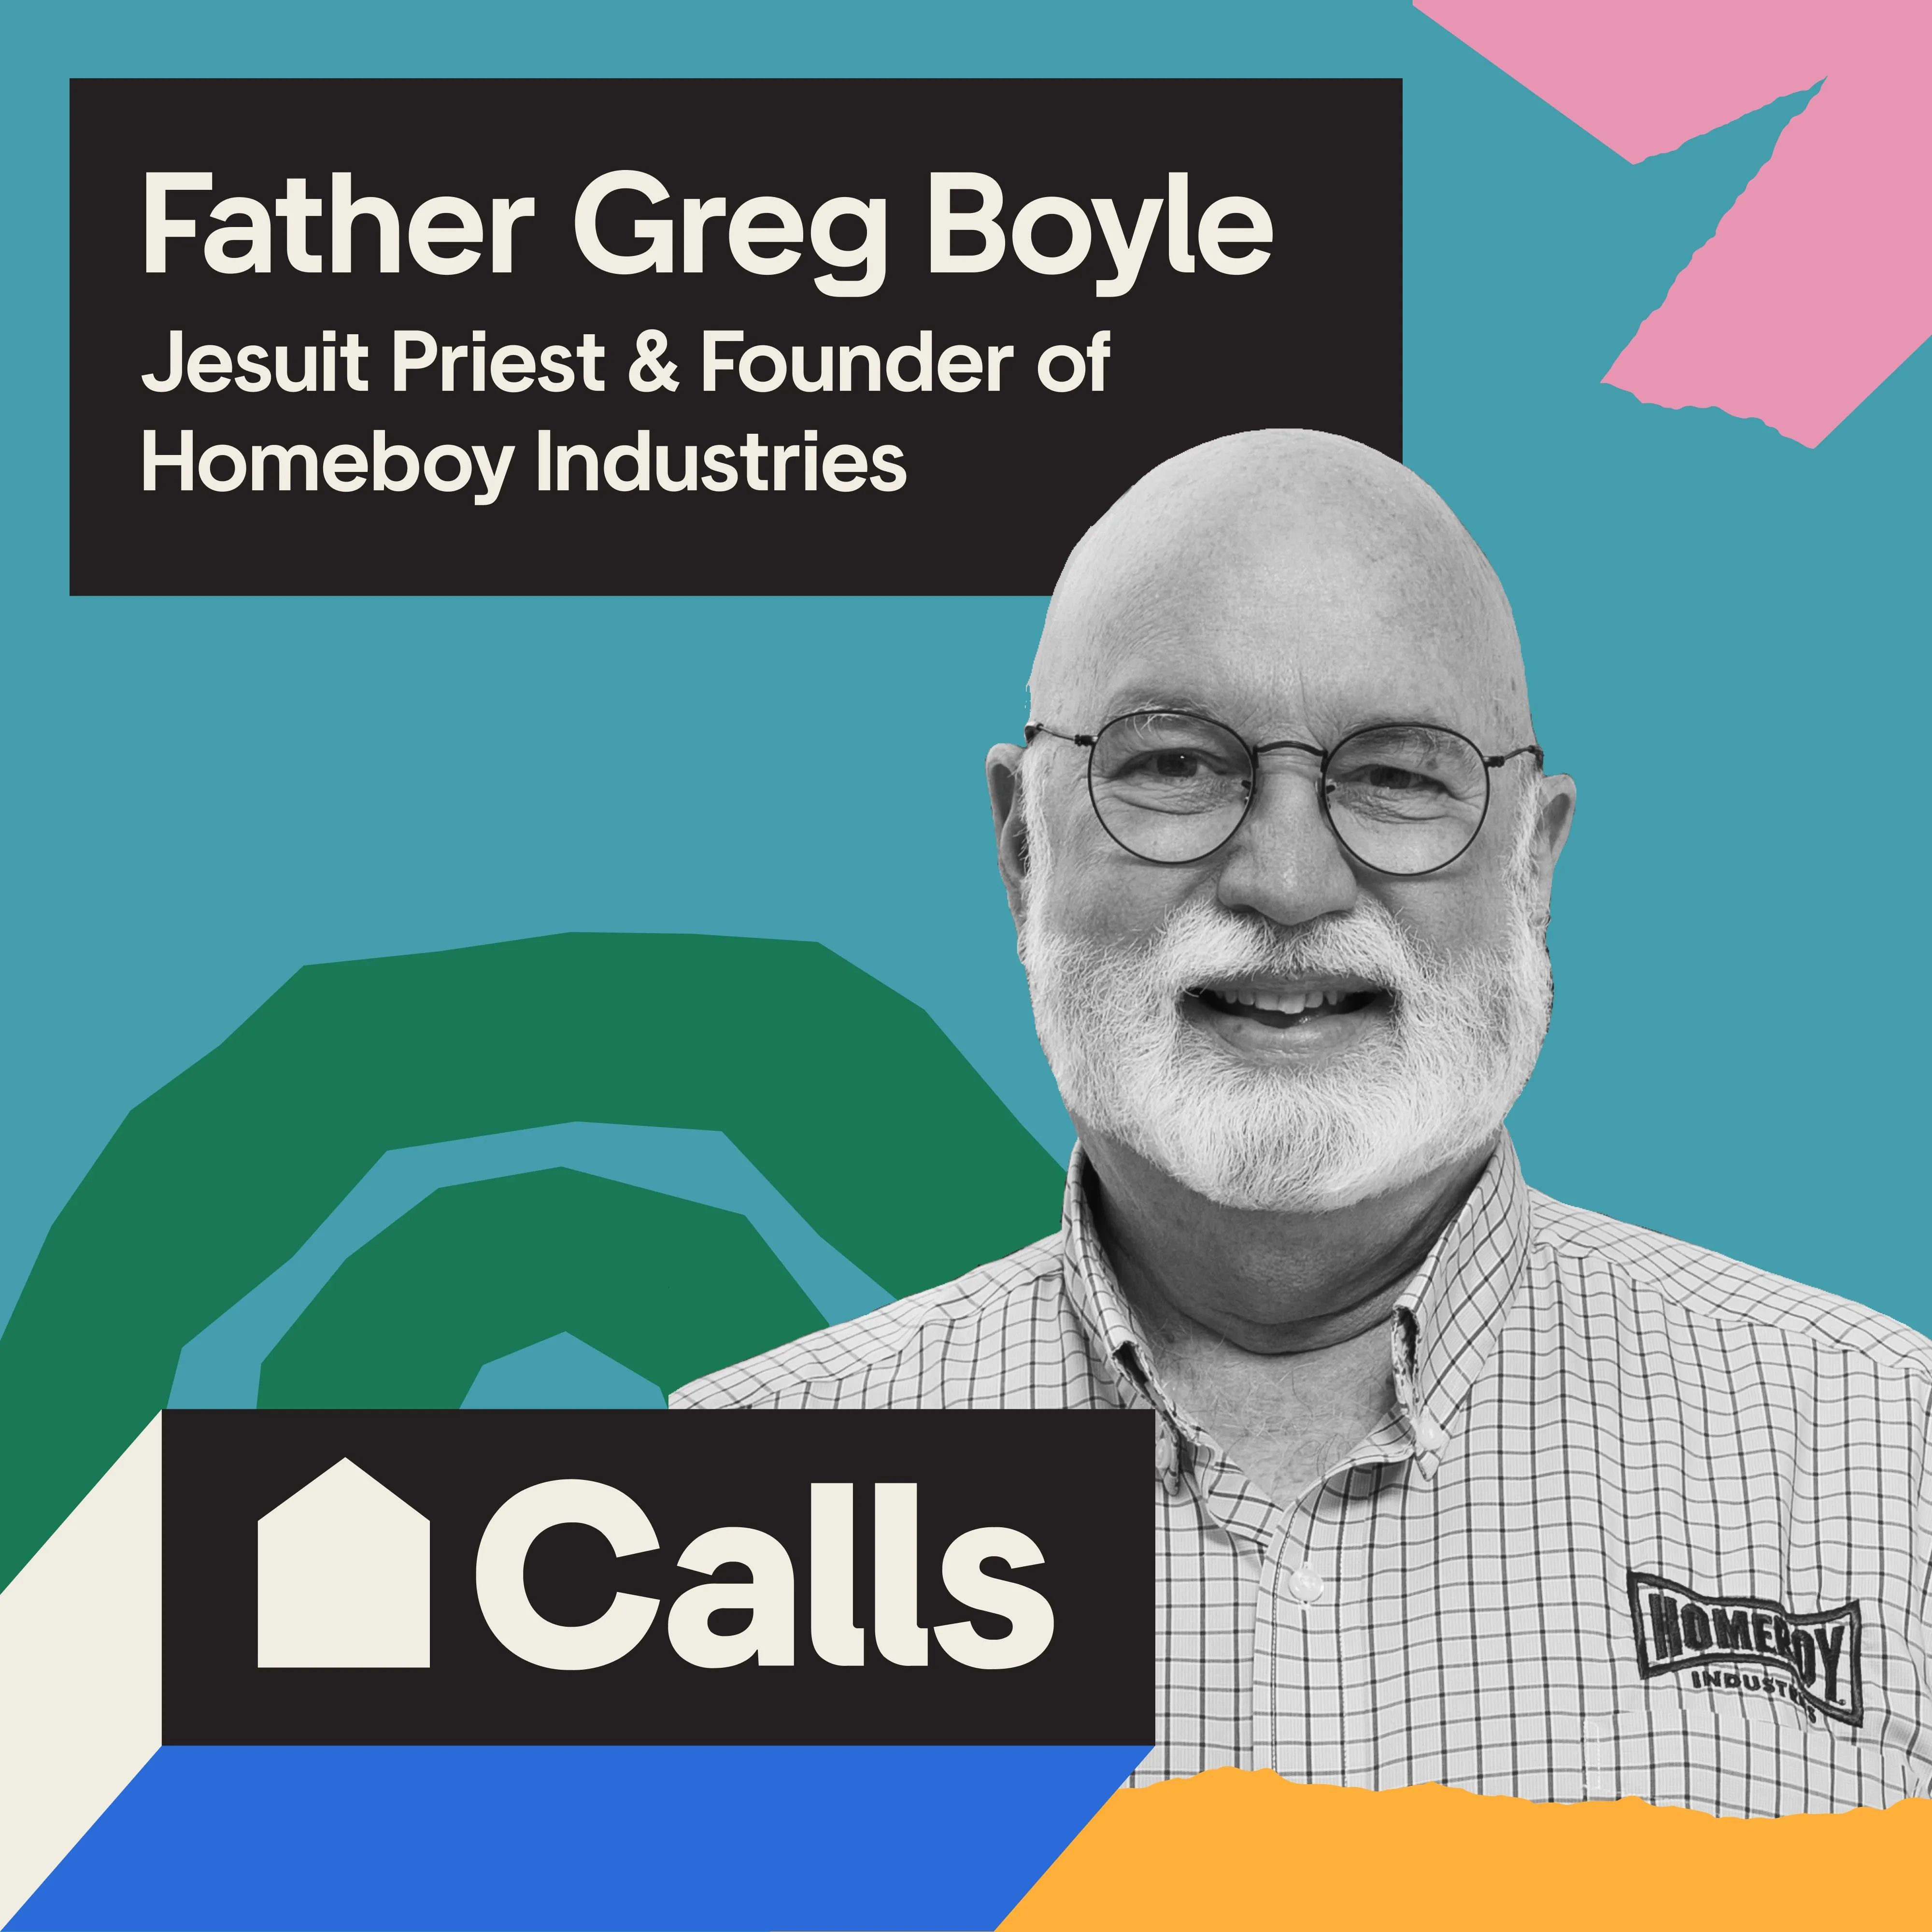 Headshot of Father Greg Boyle, Jesuit Priest & Founder of Homeboy Industries